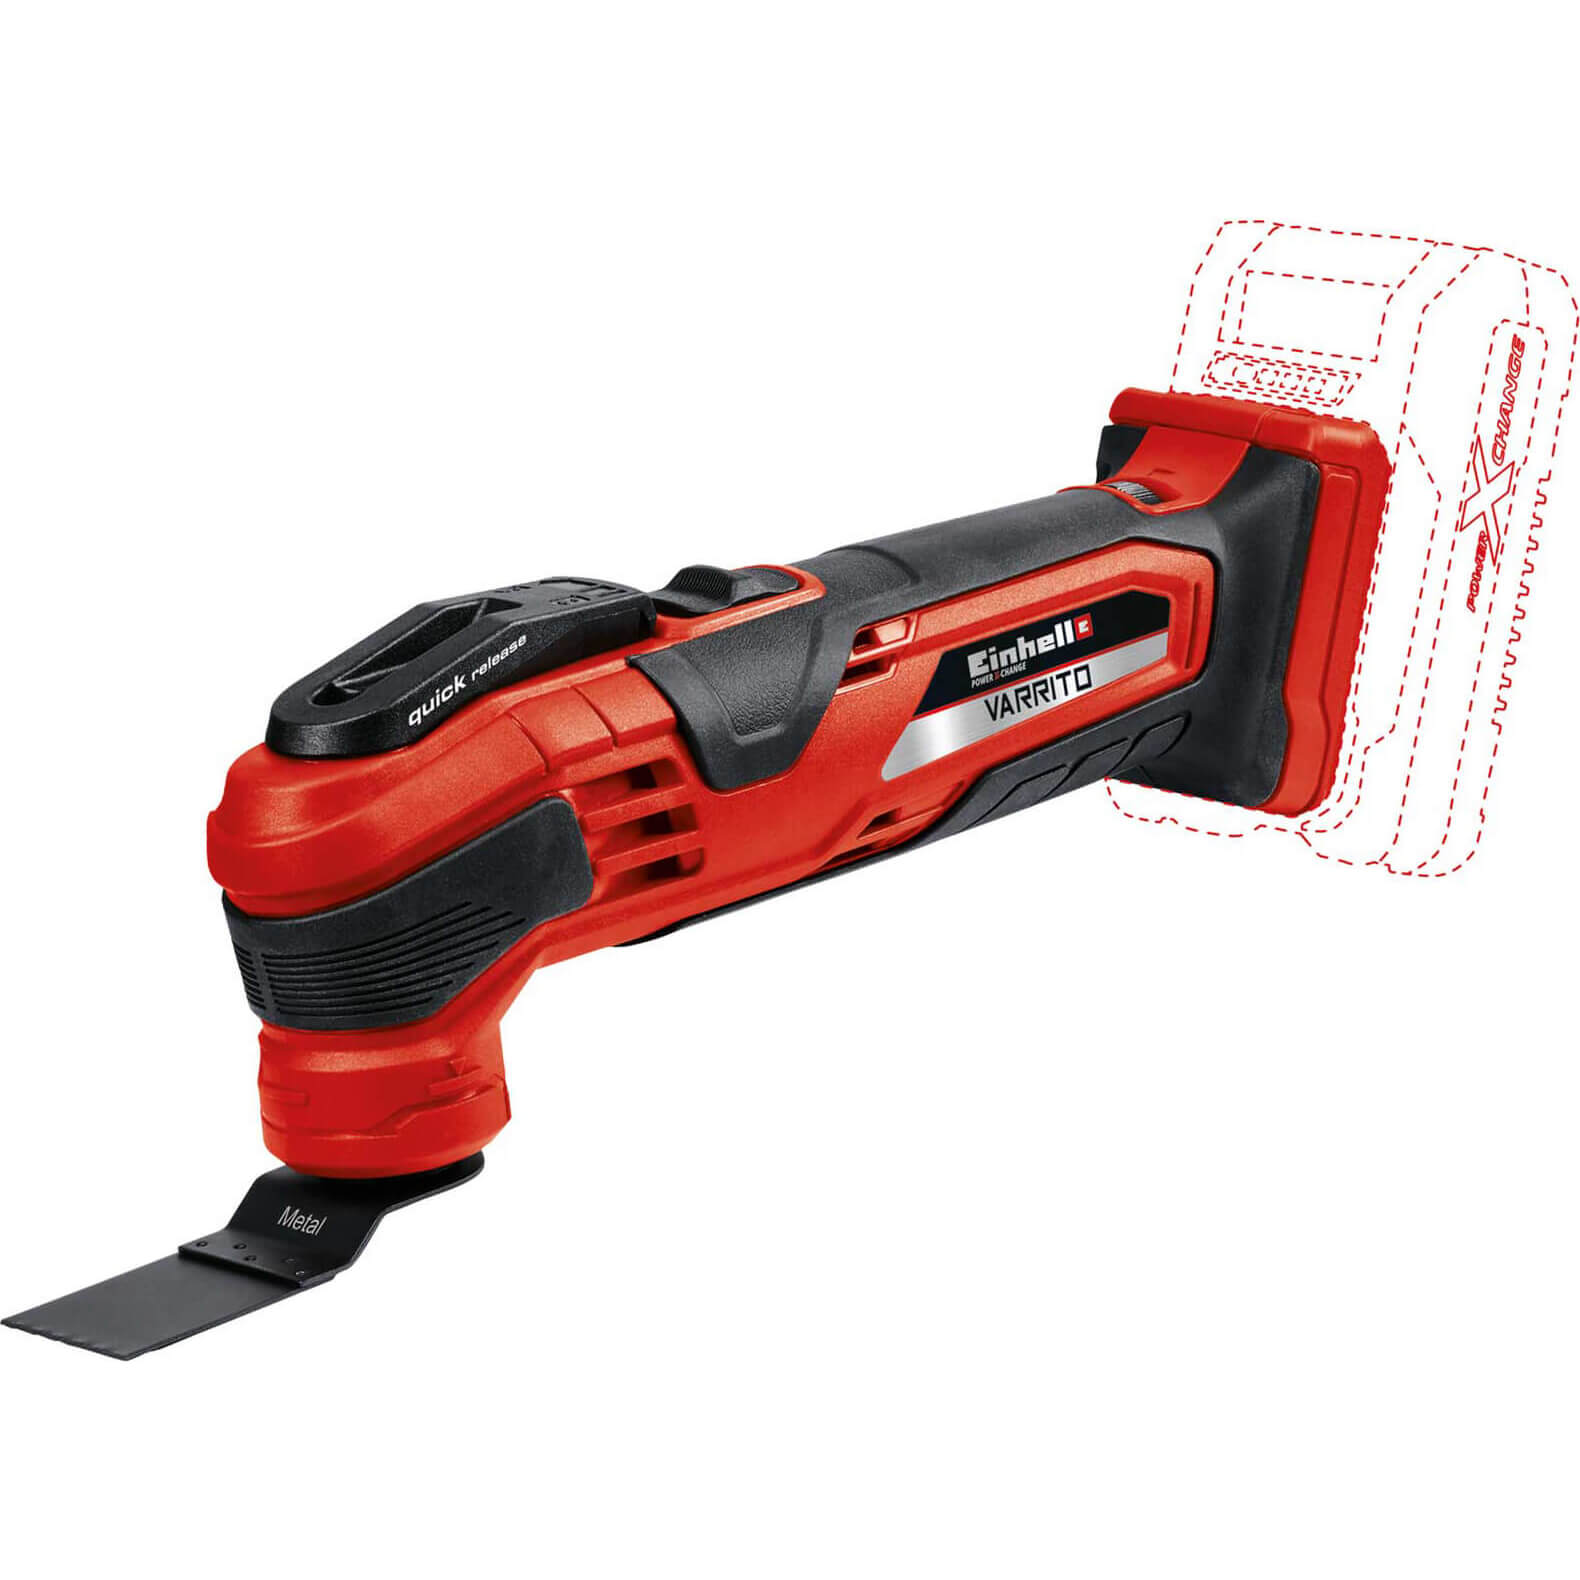 Photo of Einhell Varrito 18v Cordless Oscillating Multi Tool No Batteries No Charger No Case